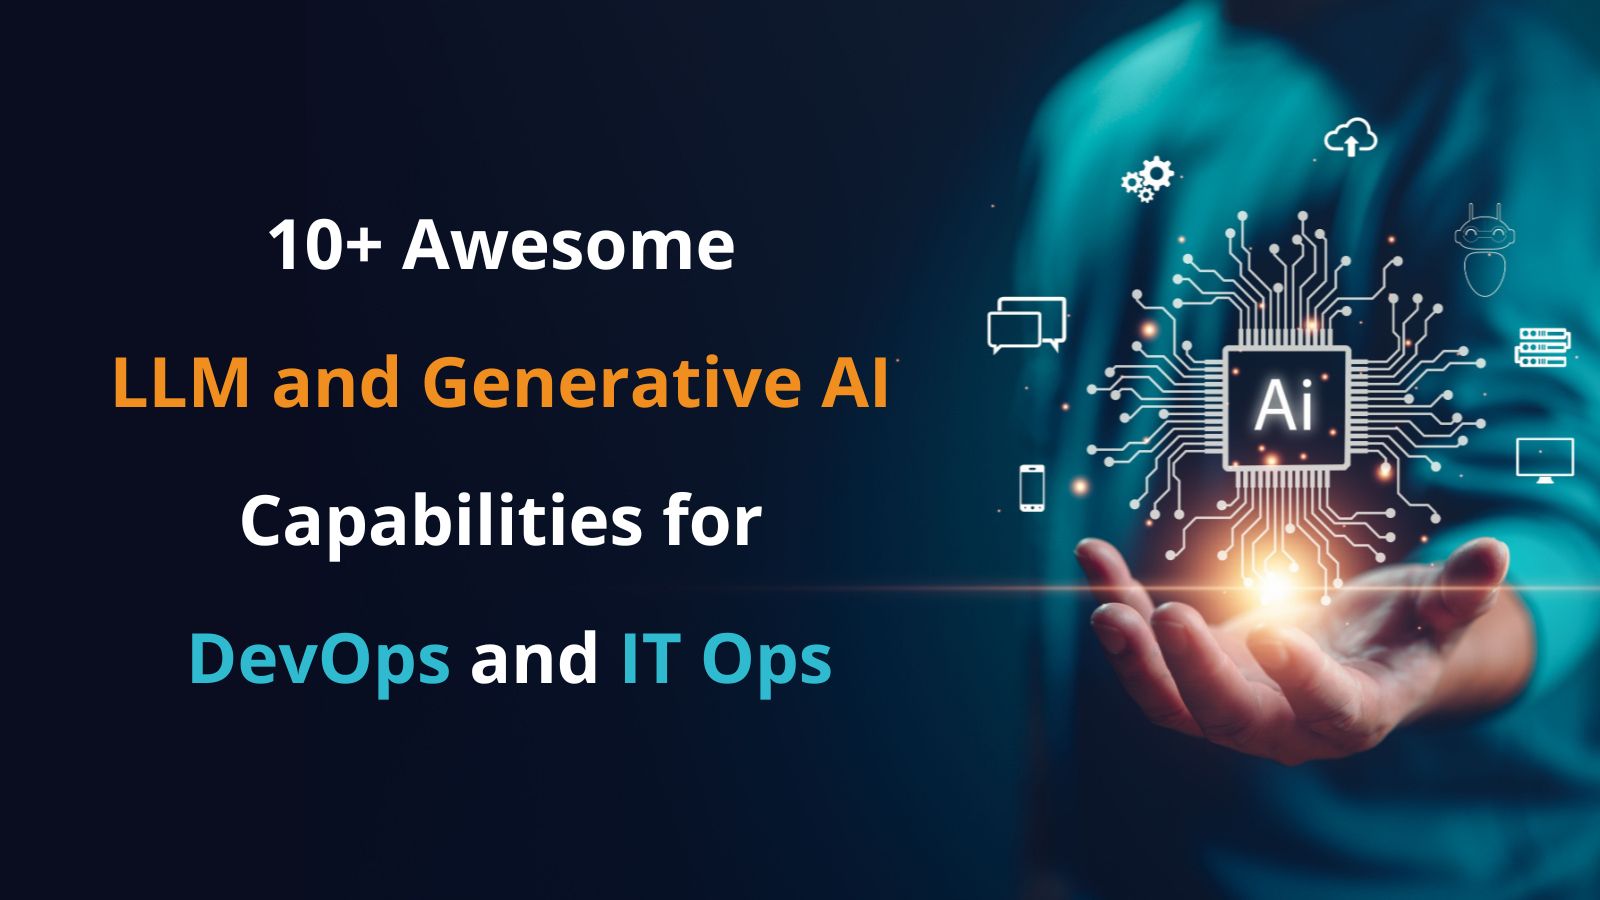 10+ Awesome LLM and Generative AI Capabilities for DevOps and IT Ops